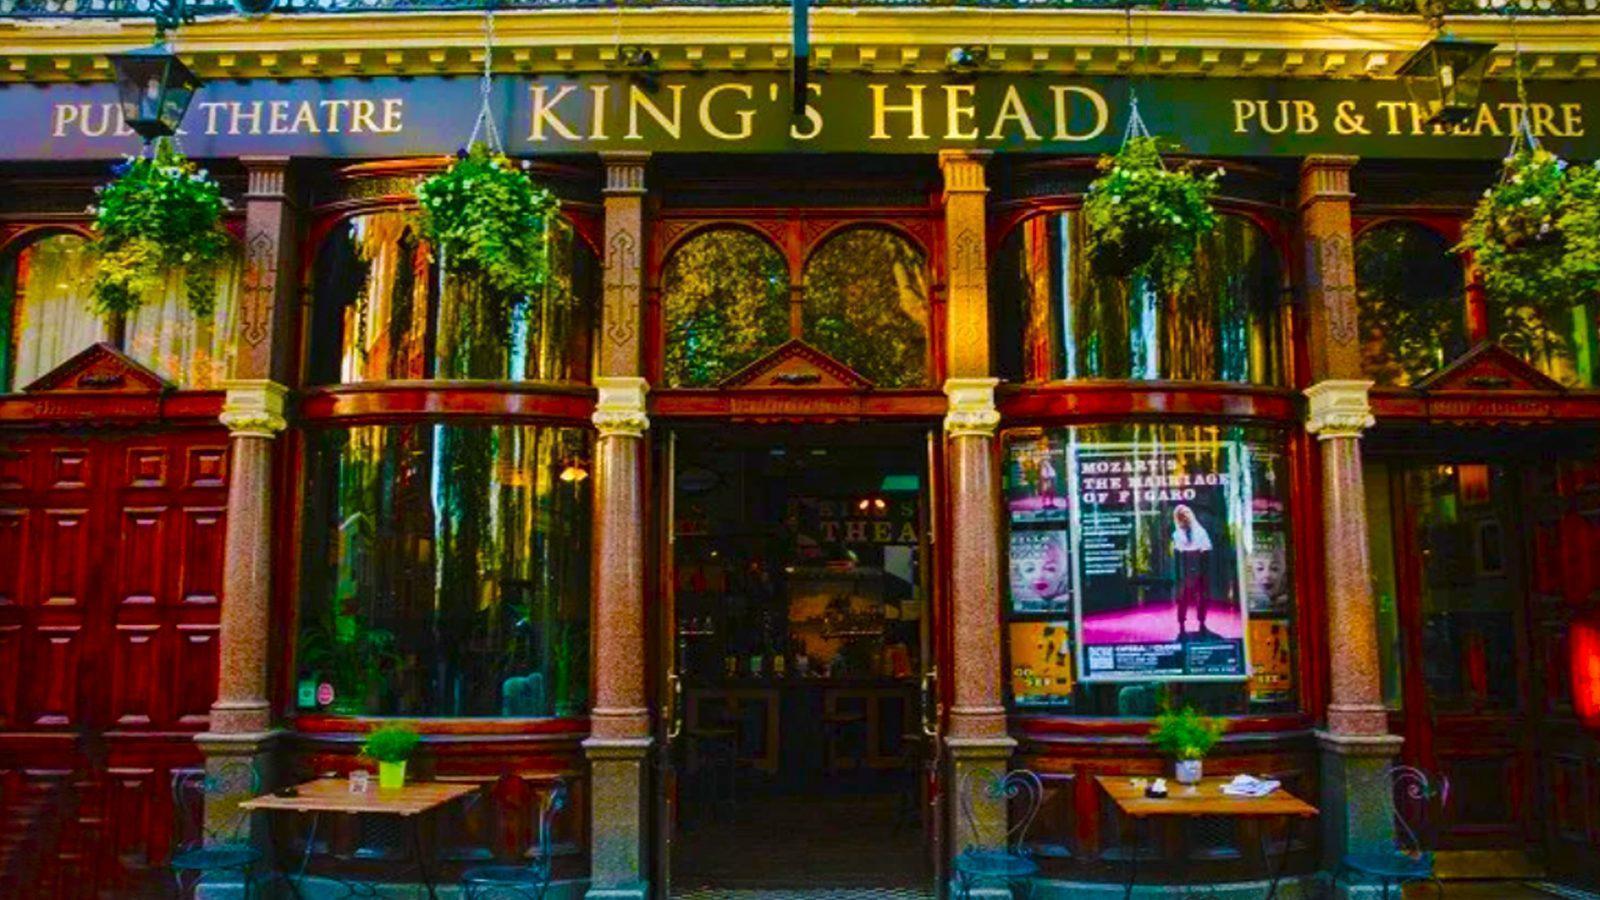 Established in 1970, King’s Head Theatre is one of the oldest pub theatres in London.